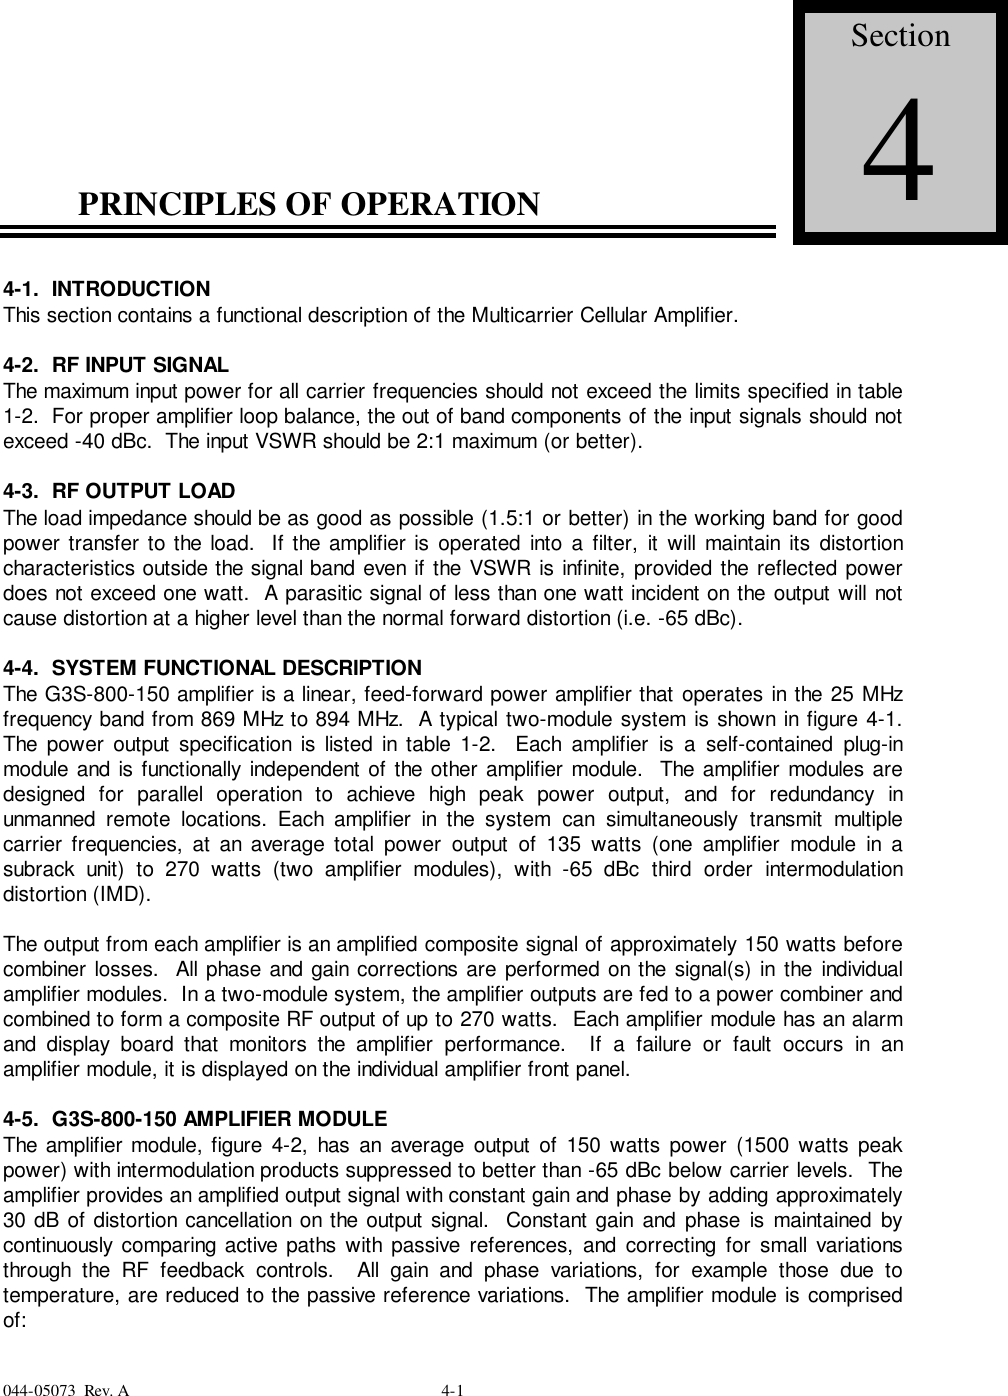 044-05073  Rev. A 4-1PRINCIPLES OF OPERATION4-1.  INTRODUCTIONThis section contains a functional description of the Multicarrier Cellular Amplifier.4-2.  RF INPUT SIGNALThe maximum input power for all carrier frequencies should not exceed the limits specified in table1-2.  For proper amplifier loop balance, the out of band components of the input signals should notexceed -40 dBc.  The input VSWR should be 2:1 maximum (or better).4-3.  RF OUTPUT LOADThe load impedance should be as good as possible (1.5:1 or better) in the working band for goodpower transfer to the load.  If the amplifier is operated into a filter, it will maintain its distortioncharacteristics outside the signal band even if the VSWR is infinite, provided the reflected powerdoes not exceed one watt.  A parasitic signal of less than one watt incident on the output will notcause distortion at a higher level than the normal forward distortion (i.e. -65 dBc).4-4.  SYSTEM FUNCTIONAL DESCRIPTIONThe G3S-800-150 amplifier is a linear, feed-forward power amplifier that operates in the 25 MHzfrequency band from 869 MHz to 894 MHz.  A typical two-module system is shown in figure 4-1.The power output specification is listed in table 1-2.  Each amplifier is a self-contained plug-inmodule and is functionally independent of the other amplifier module.  The amplifier modules aredesigned for parallel operation to achieve high peak power output, and for redundancy inunmanned remote locations. Each amplifier in the system can simultaneously transmit multiplecarrier frequencies, at an average total power output of 135 watts (one amplifier module in asubrack unit) to 270 watts (two amplifier modules), with -65 dBc third order intermodulationdistortion (IMD).The output from each amplifier is an amplified composite signal of approximately 150 watts beforecombiner losses.  All phase and gain corrections are performed on the signal(s) in the individualamplifier modules.  In a two-module system, the amplifier outputs are fed to a power combiner andcombined to form a composite RF output of up to 270 watts.  Each amplifier module has an alarmand display board that monitors the amplifier performance.  If a failure or fault occurs in anamplifier module, it is displayed on the individual amplifier front panel.4-5.  G3S-800-150 AMPLIFIER MODULEThe amplifier module, figure 4-2, has an average output of 150 watts power (1500 watts peakpower) with intermodulation products suppressed to better than -65 dBc below carrier levels.  Theamplifier provides an amplified output signal with constant gain and phase by adding approximately30 dB of distortion cancellation on the output signal.  Constant gain and phase is maintained bycontinuously comparing active paths with passive references, and correcting for small variationsthrough the RF feedback controls.  All gain and phase variations, for example those due totemperature, are reduced to the passive reference variations.  The amplifier module is comprisedof:Section4